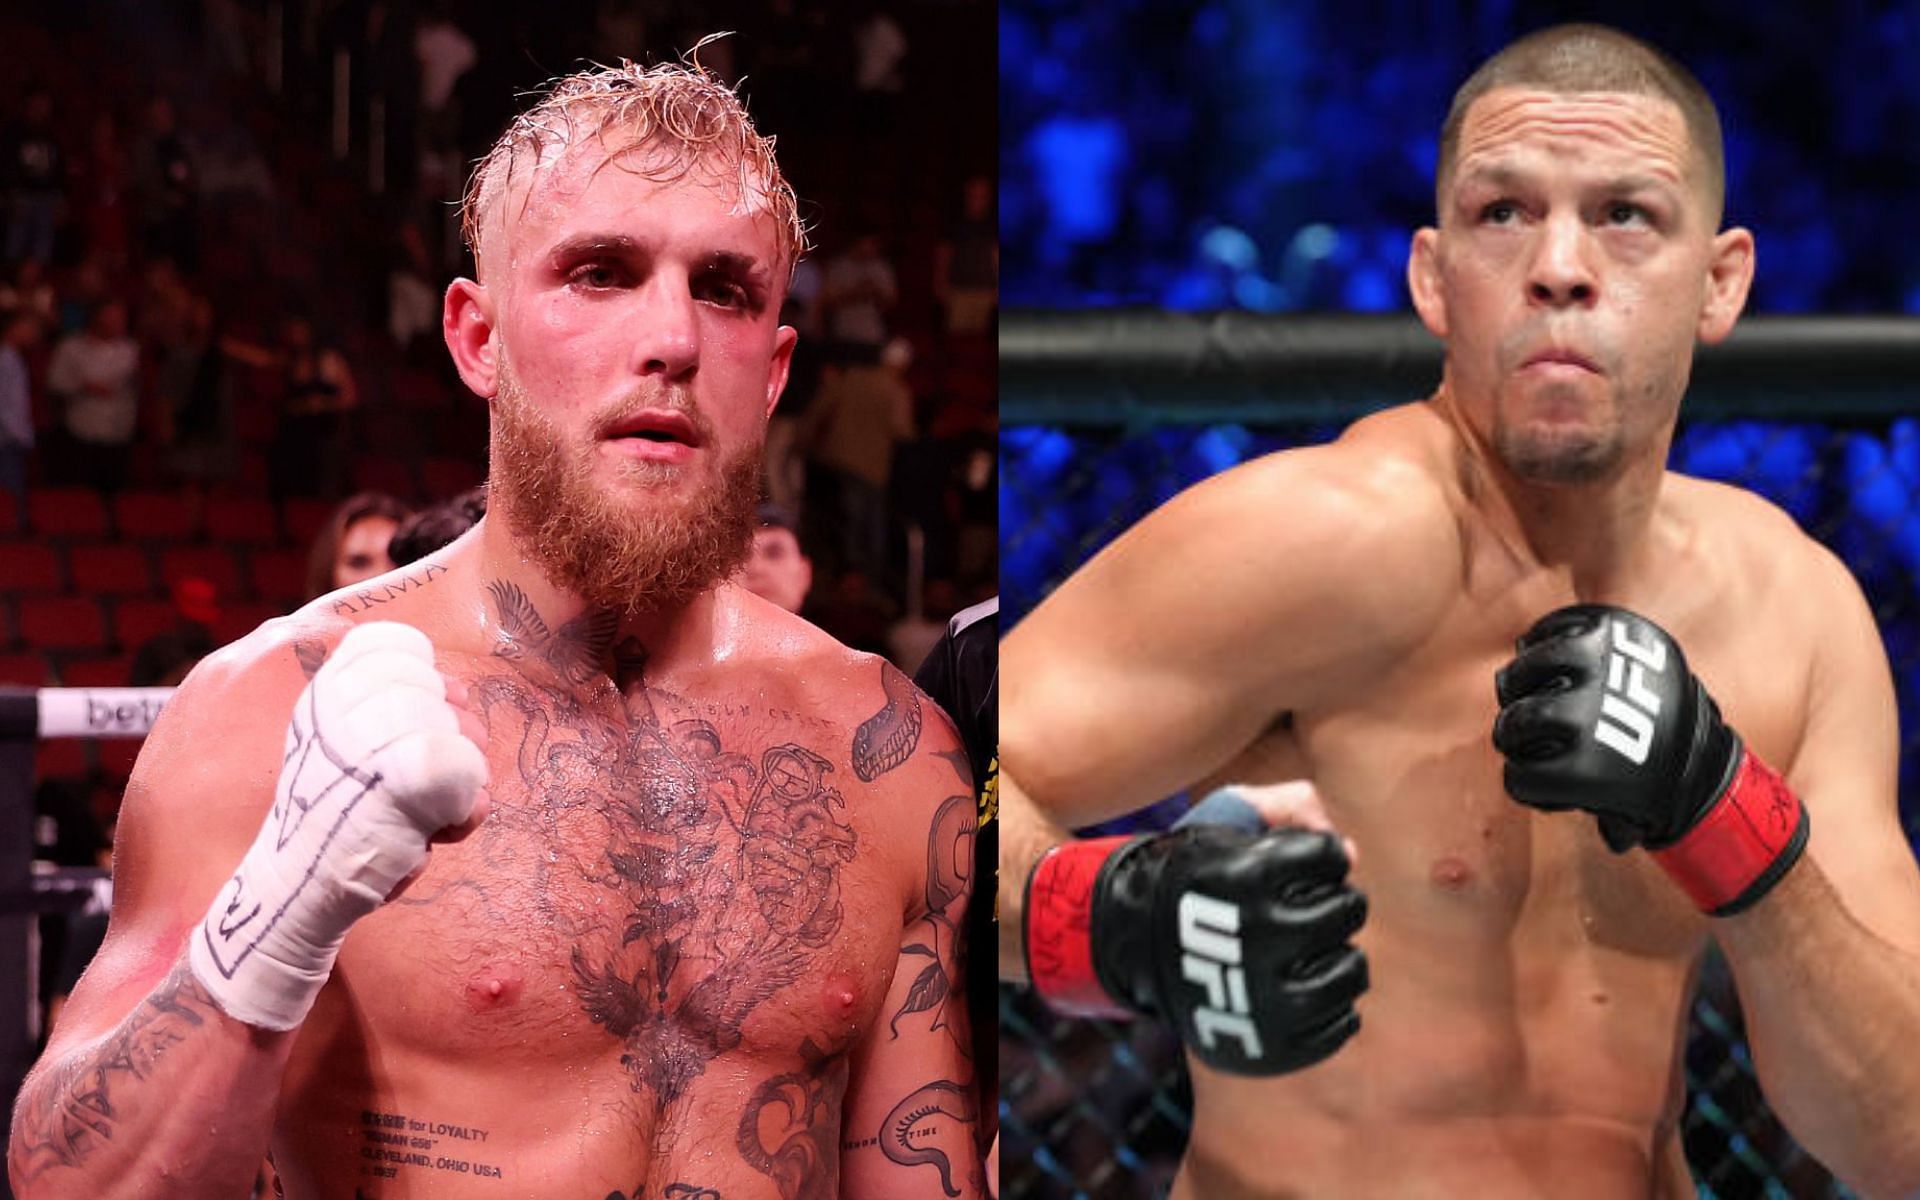 Jake Paul and Nate Diaz close to agreeing a deal for boxing match according to reports